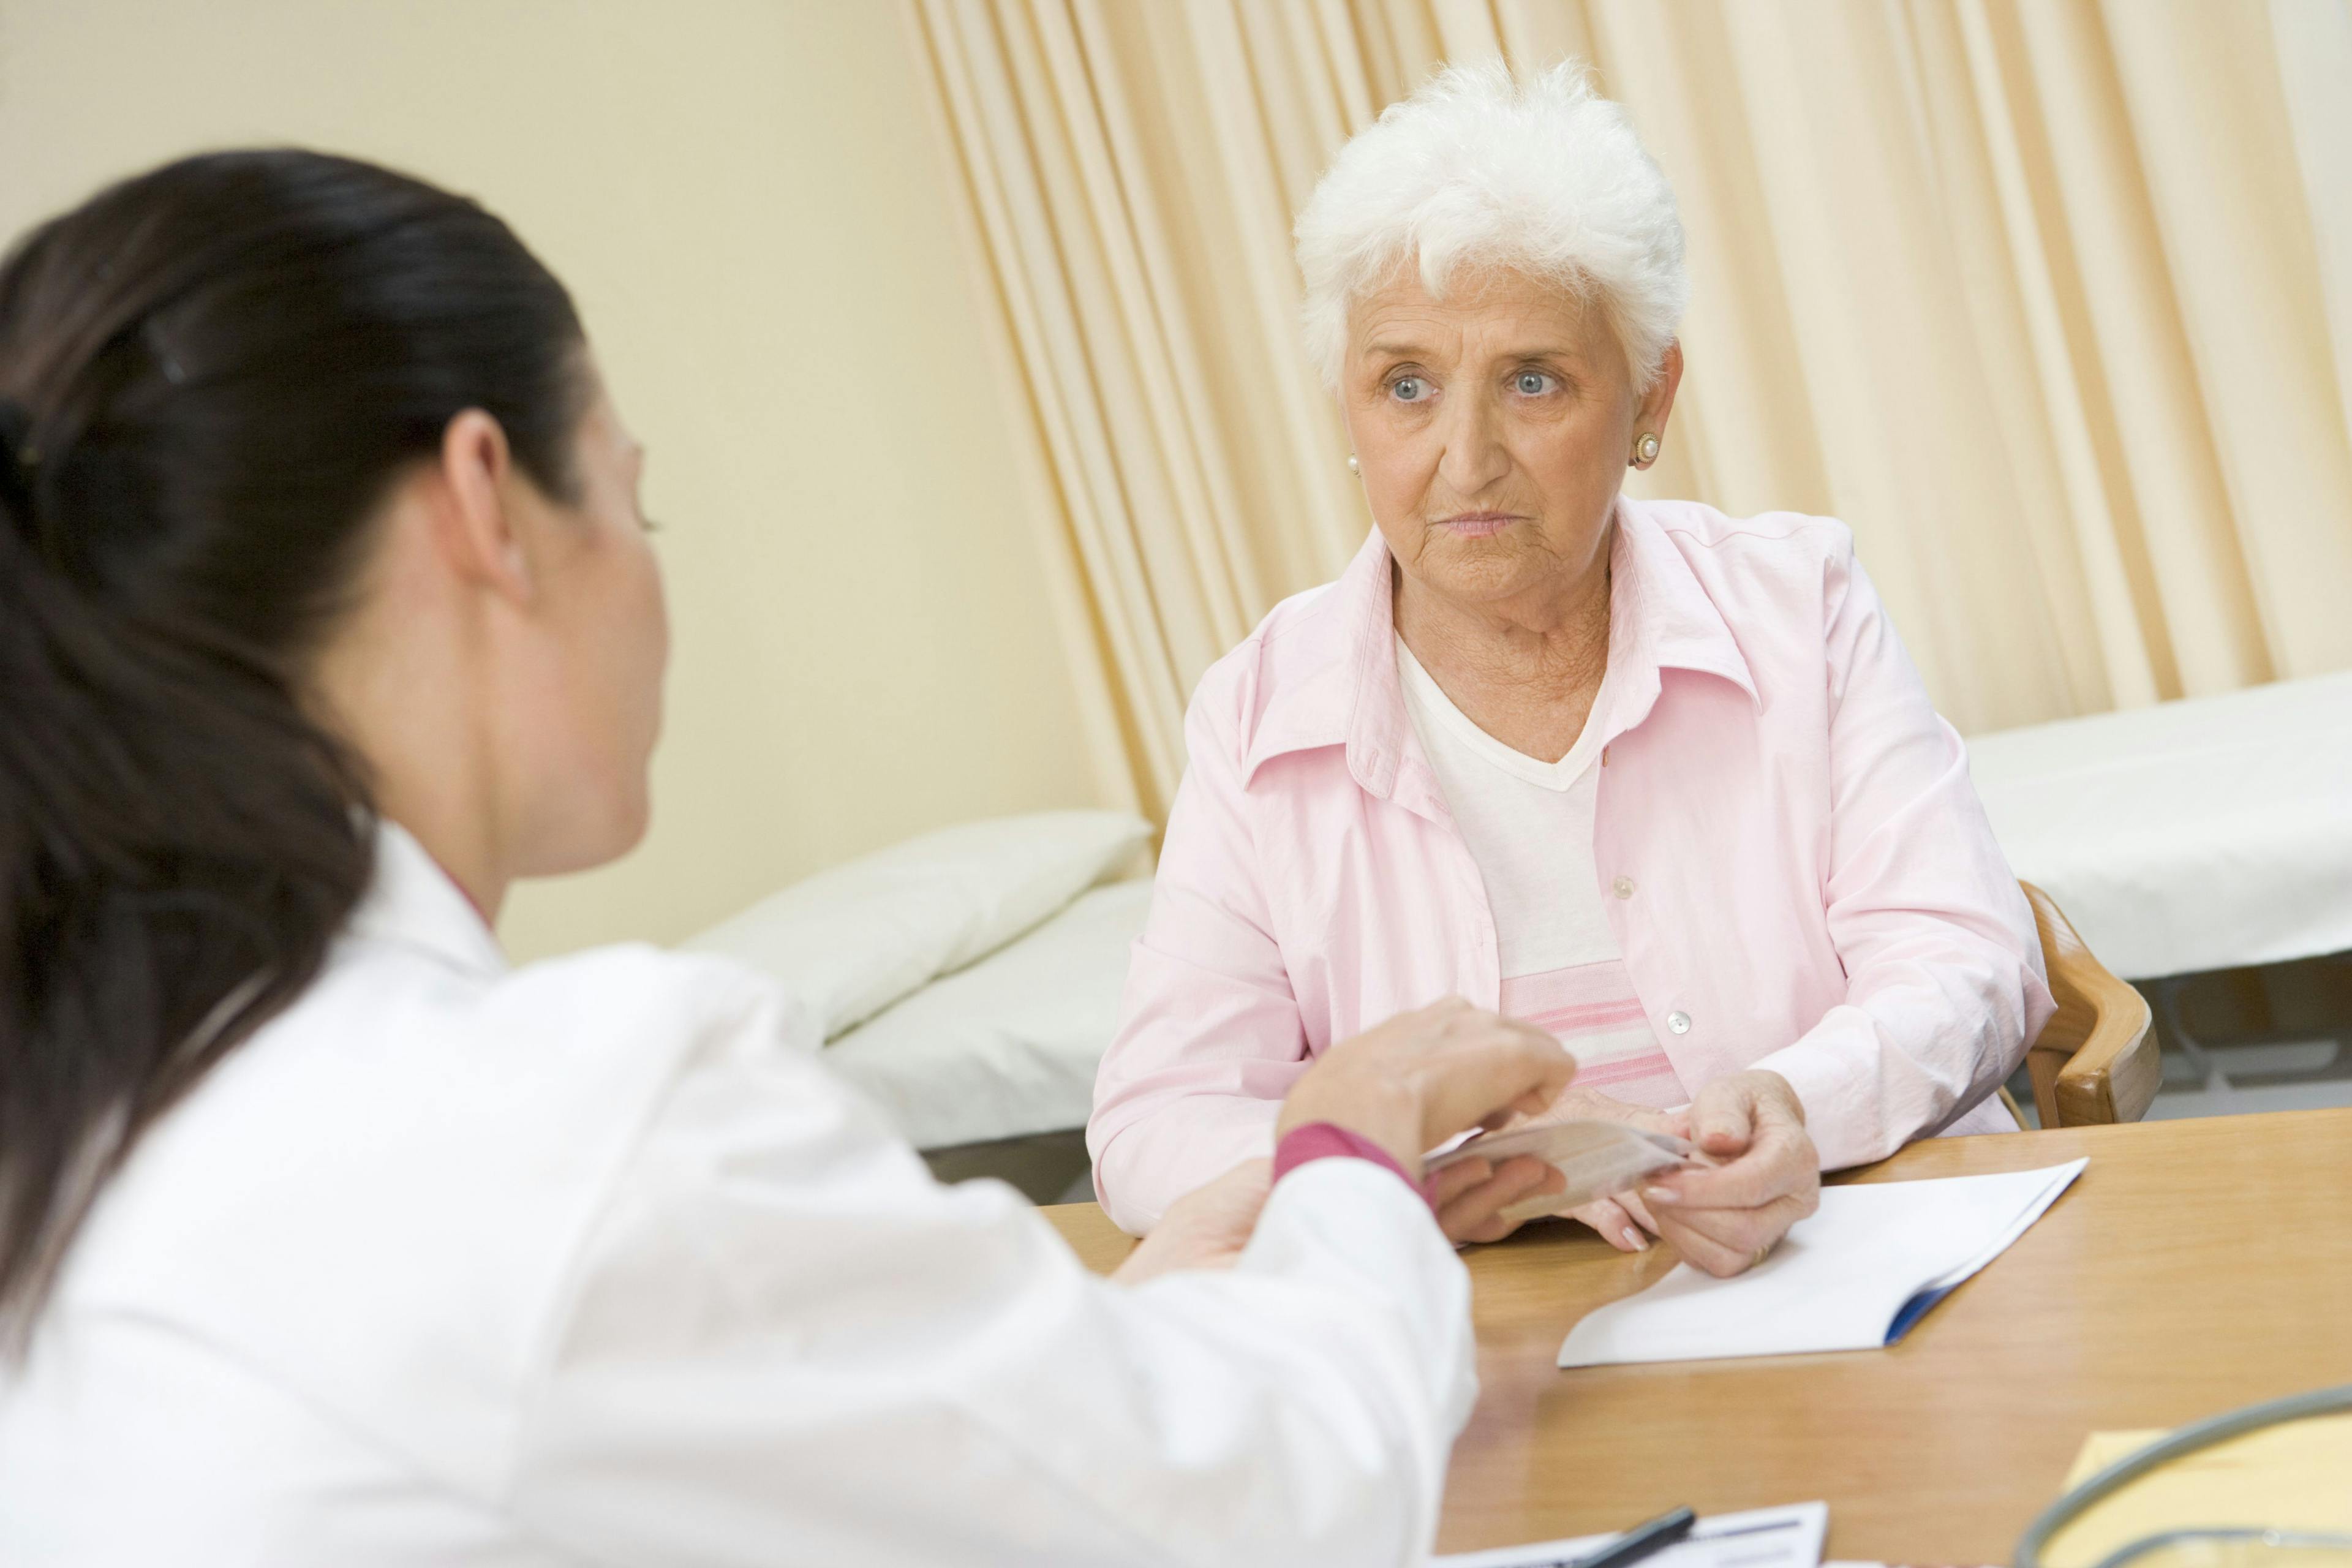 Pharmacist counseling older patient